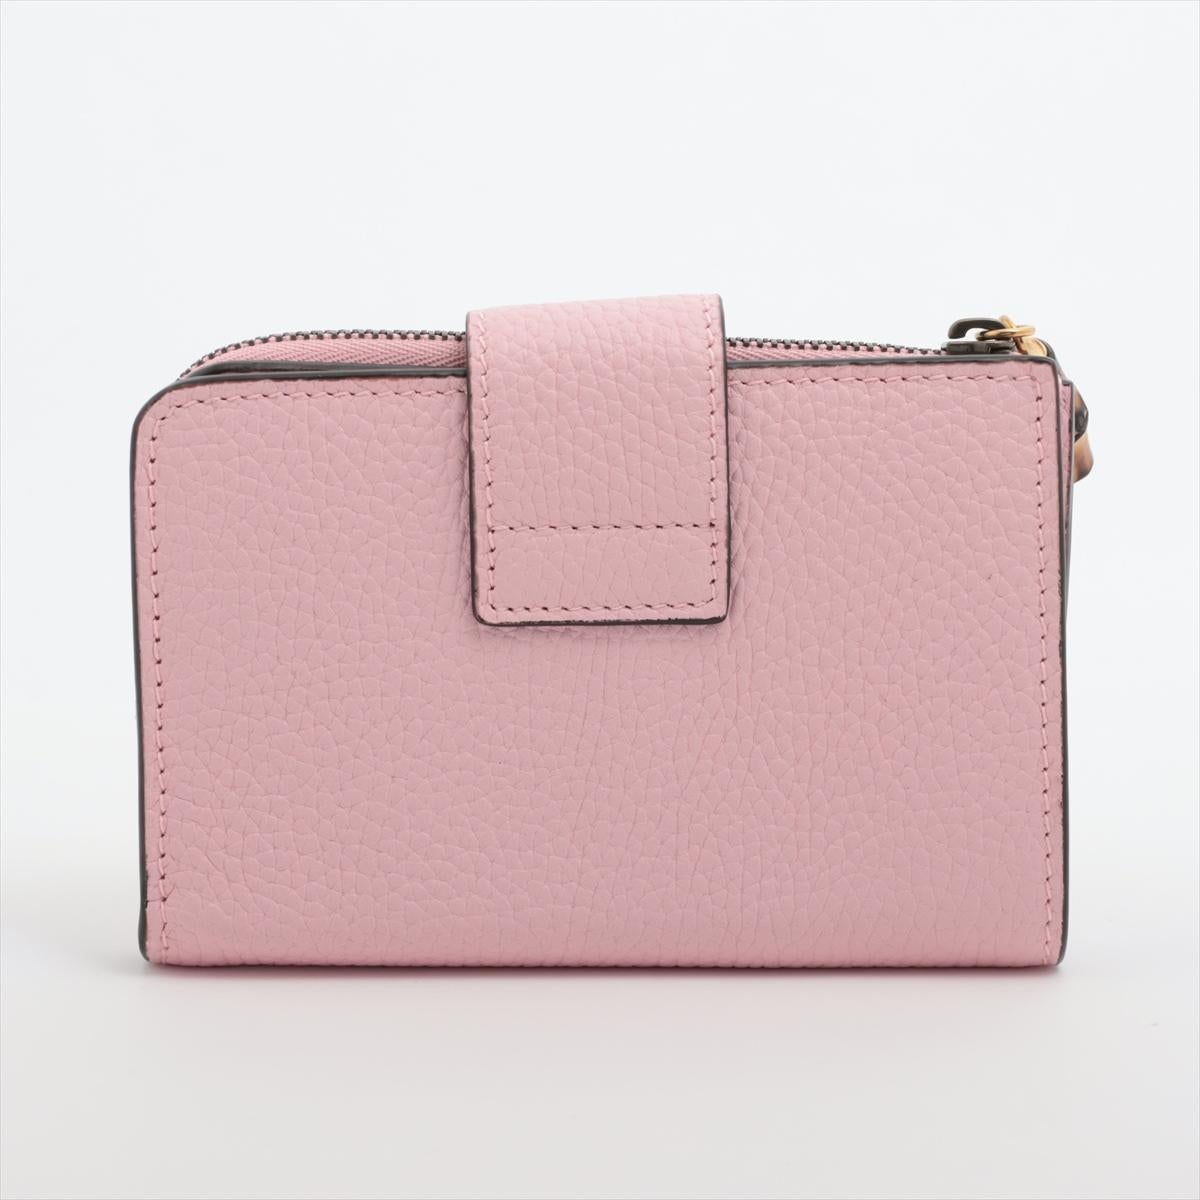 Gucci Bamboo Double G Leather Bi-fold Wallet Pink In Good Condition For Sale In Indianapolis, IN